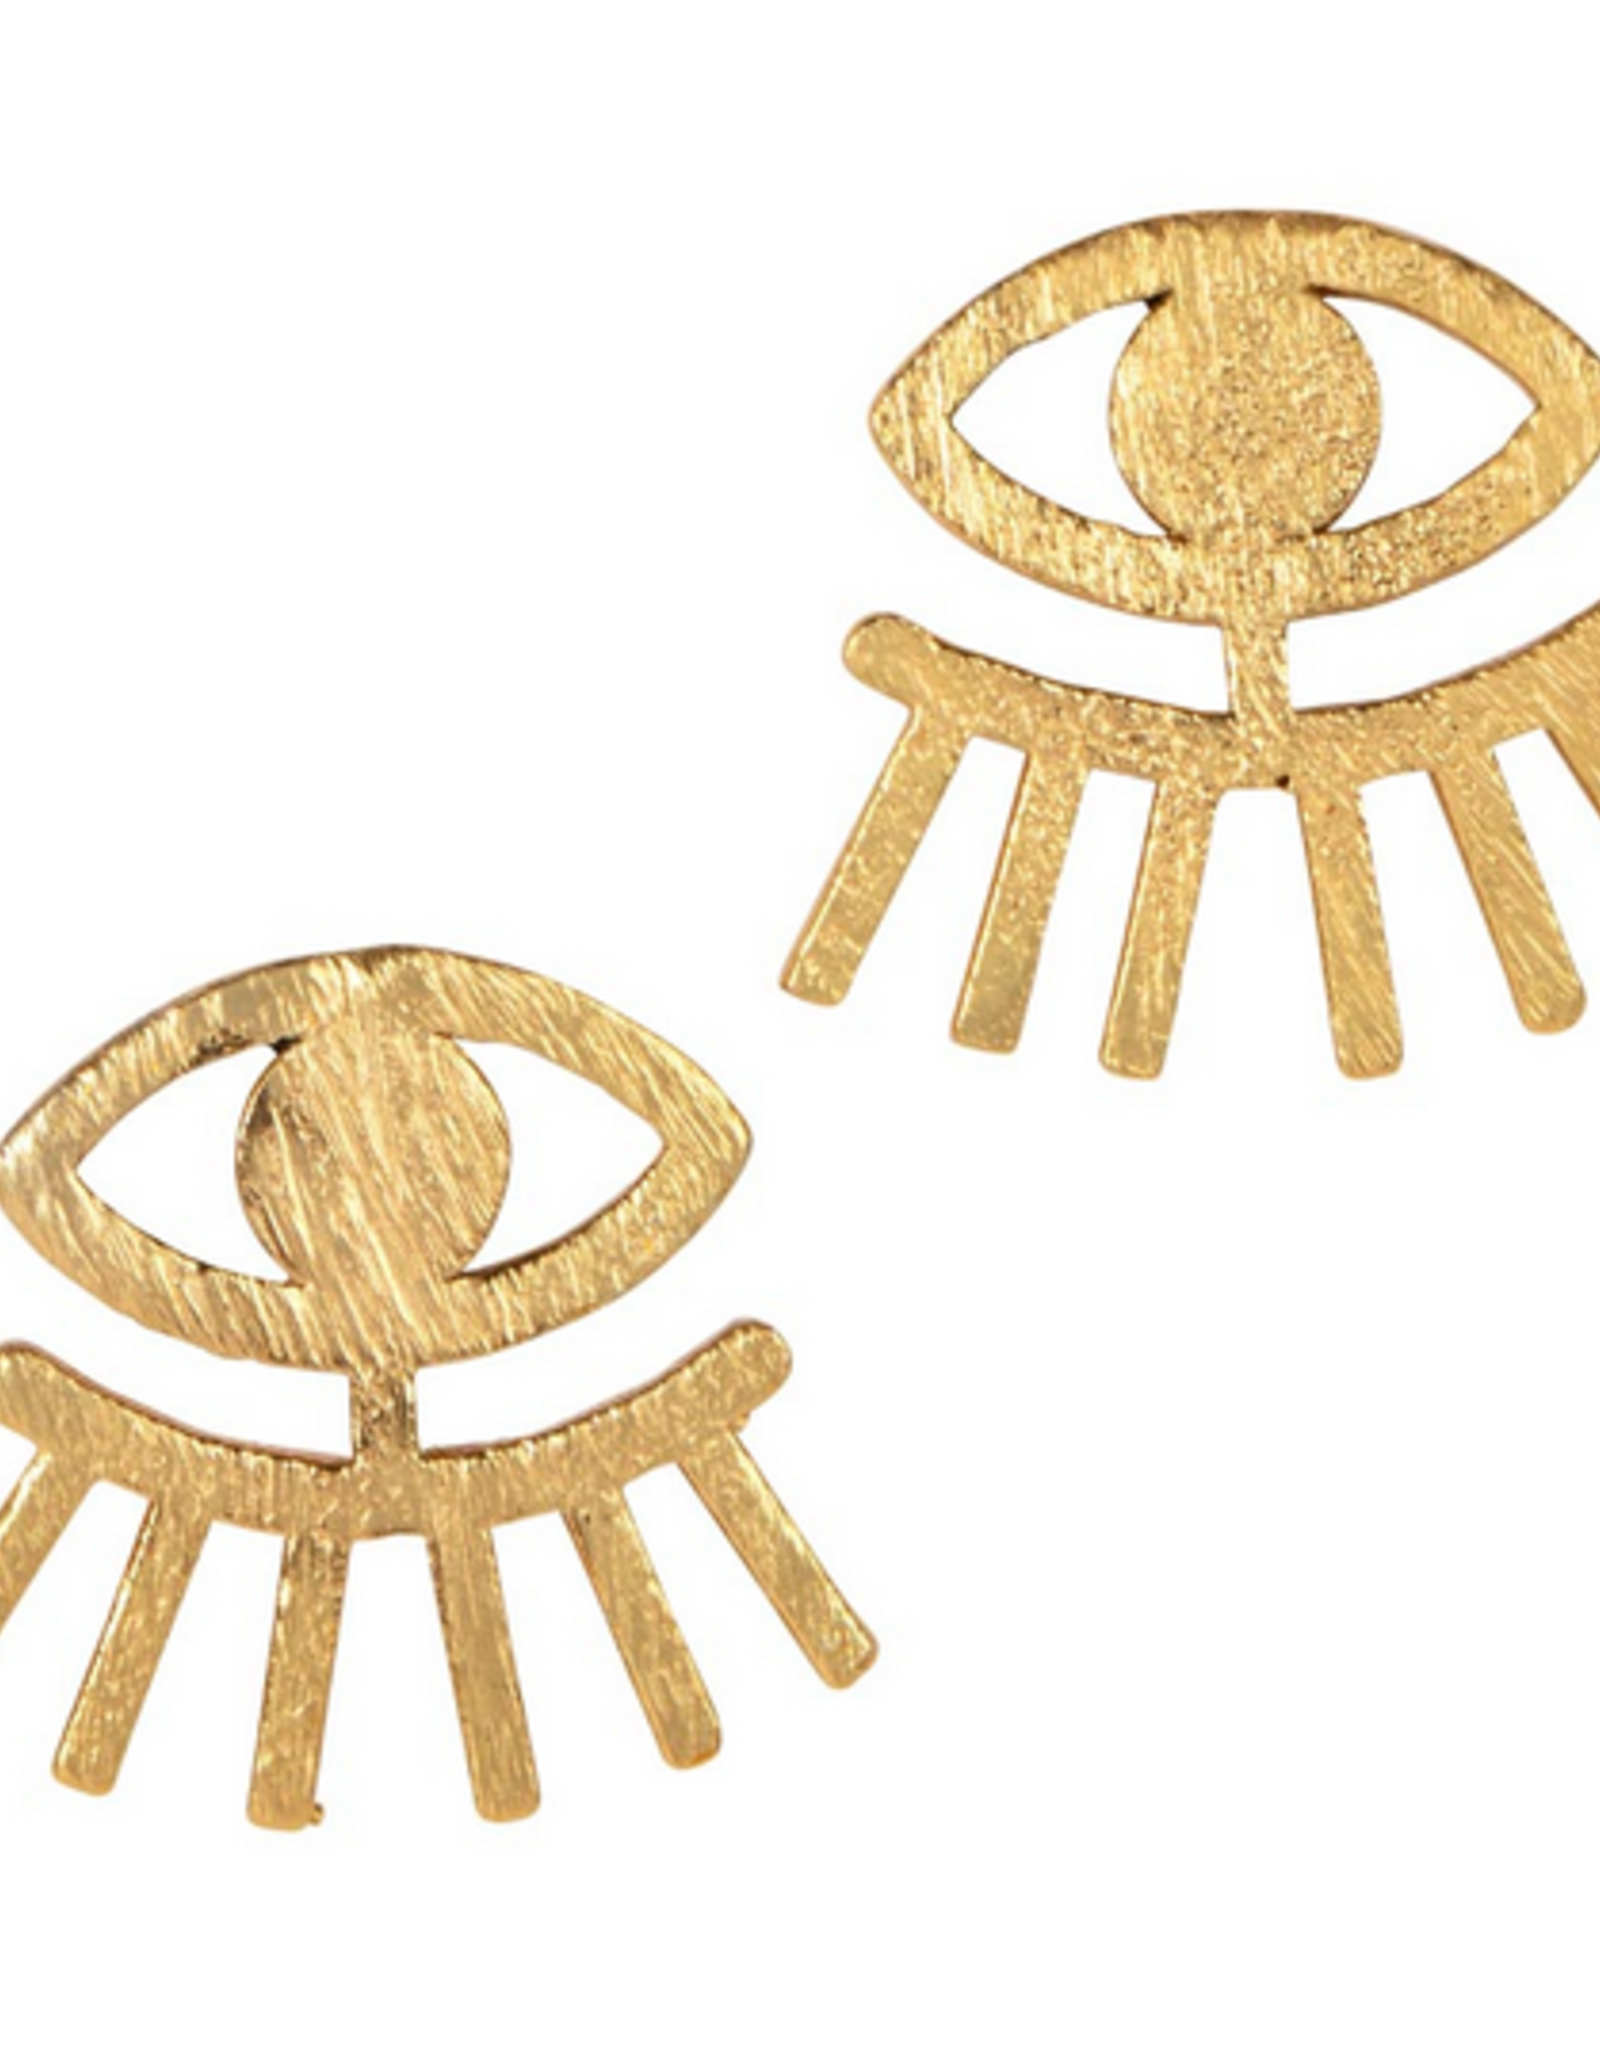 India Earrings Clear Vision Post - India